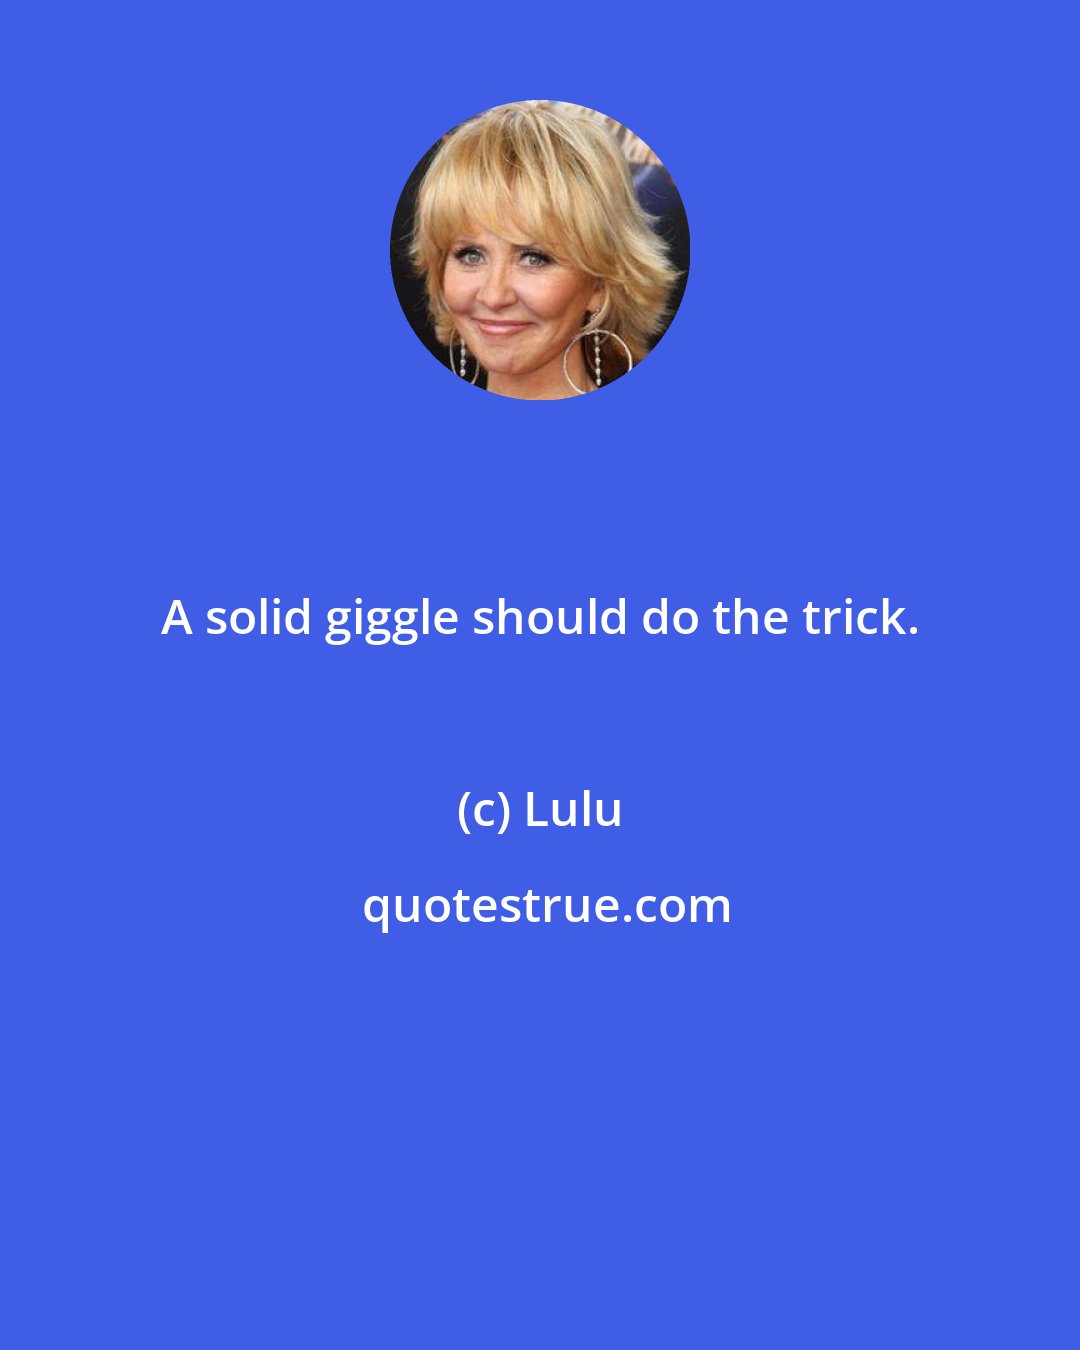 Lulu: A solid giggle should do the trick.